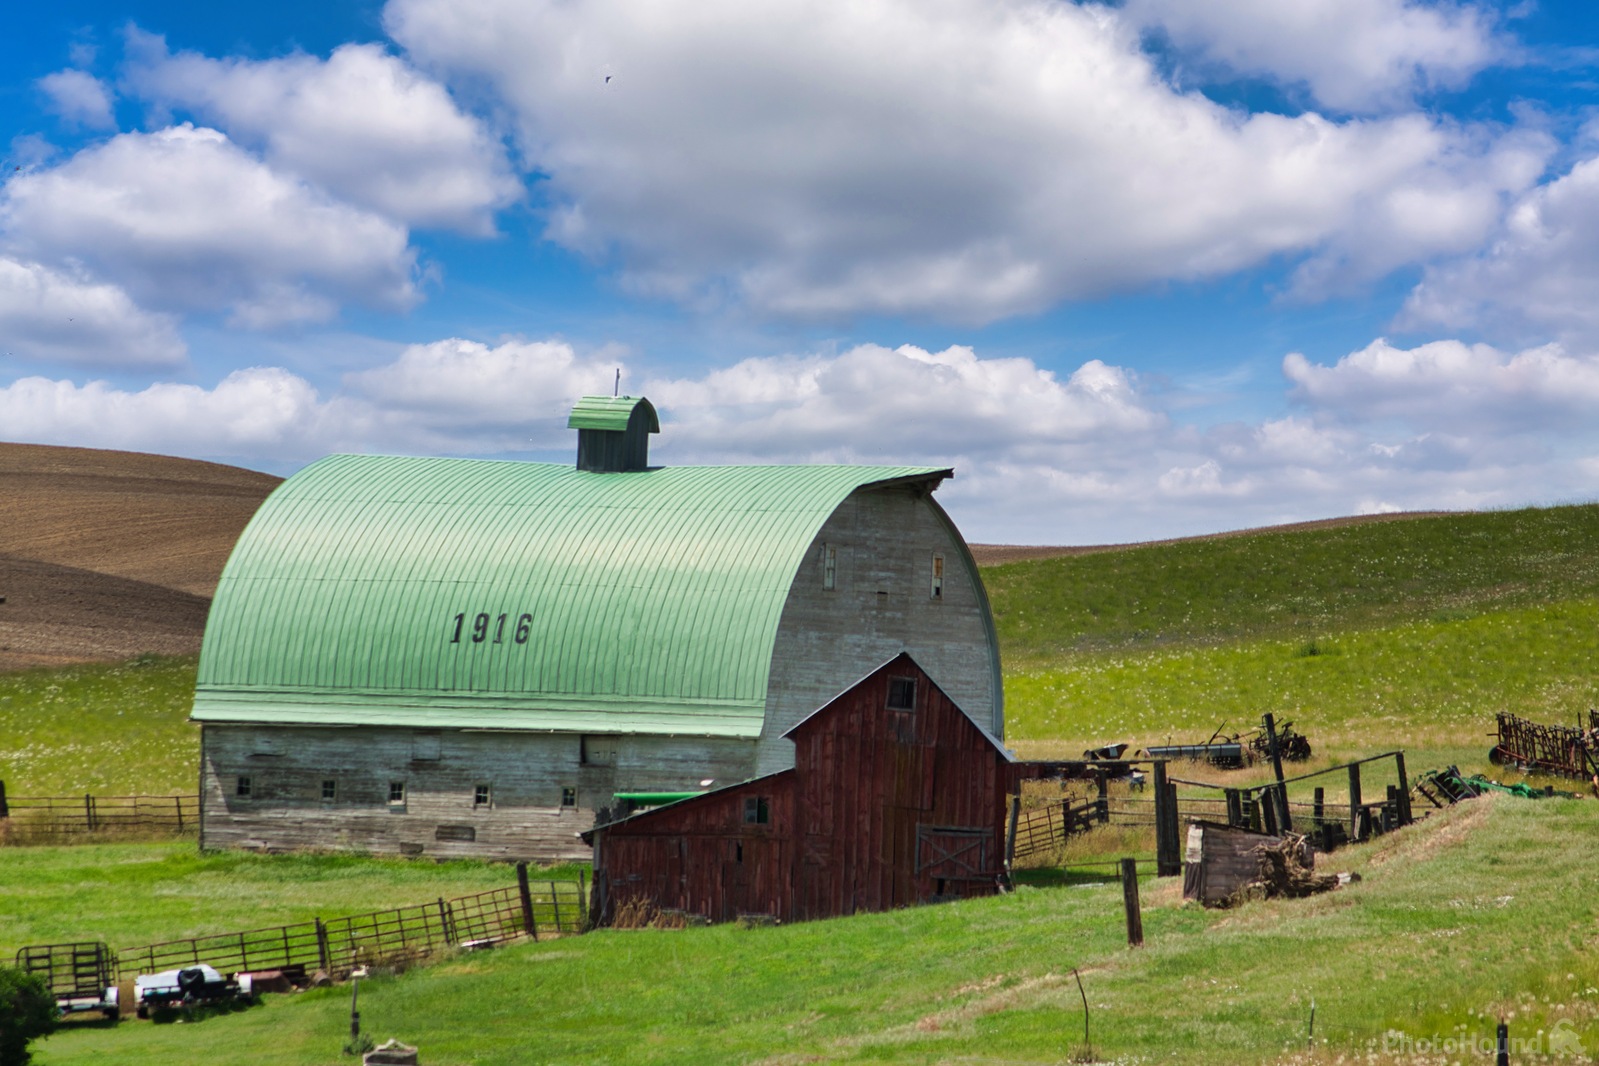 Image of The 1916 Barn by Steve West